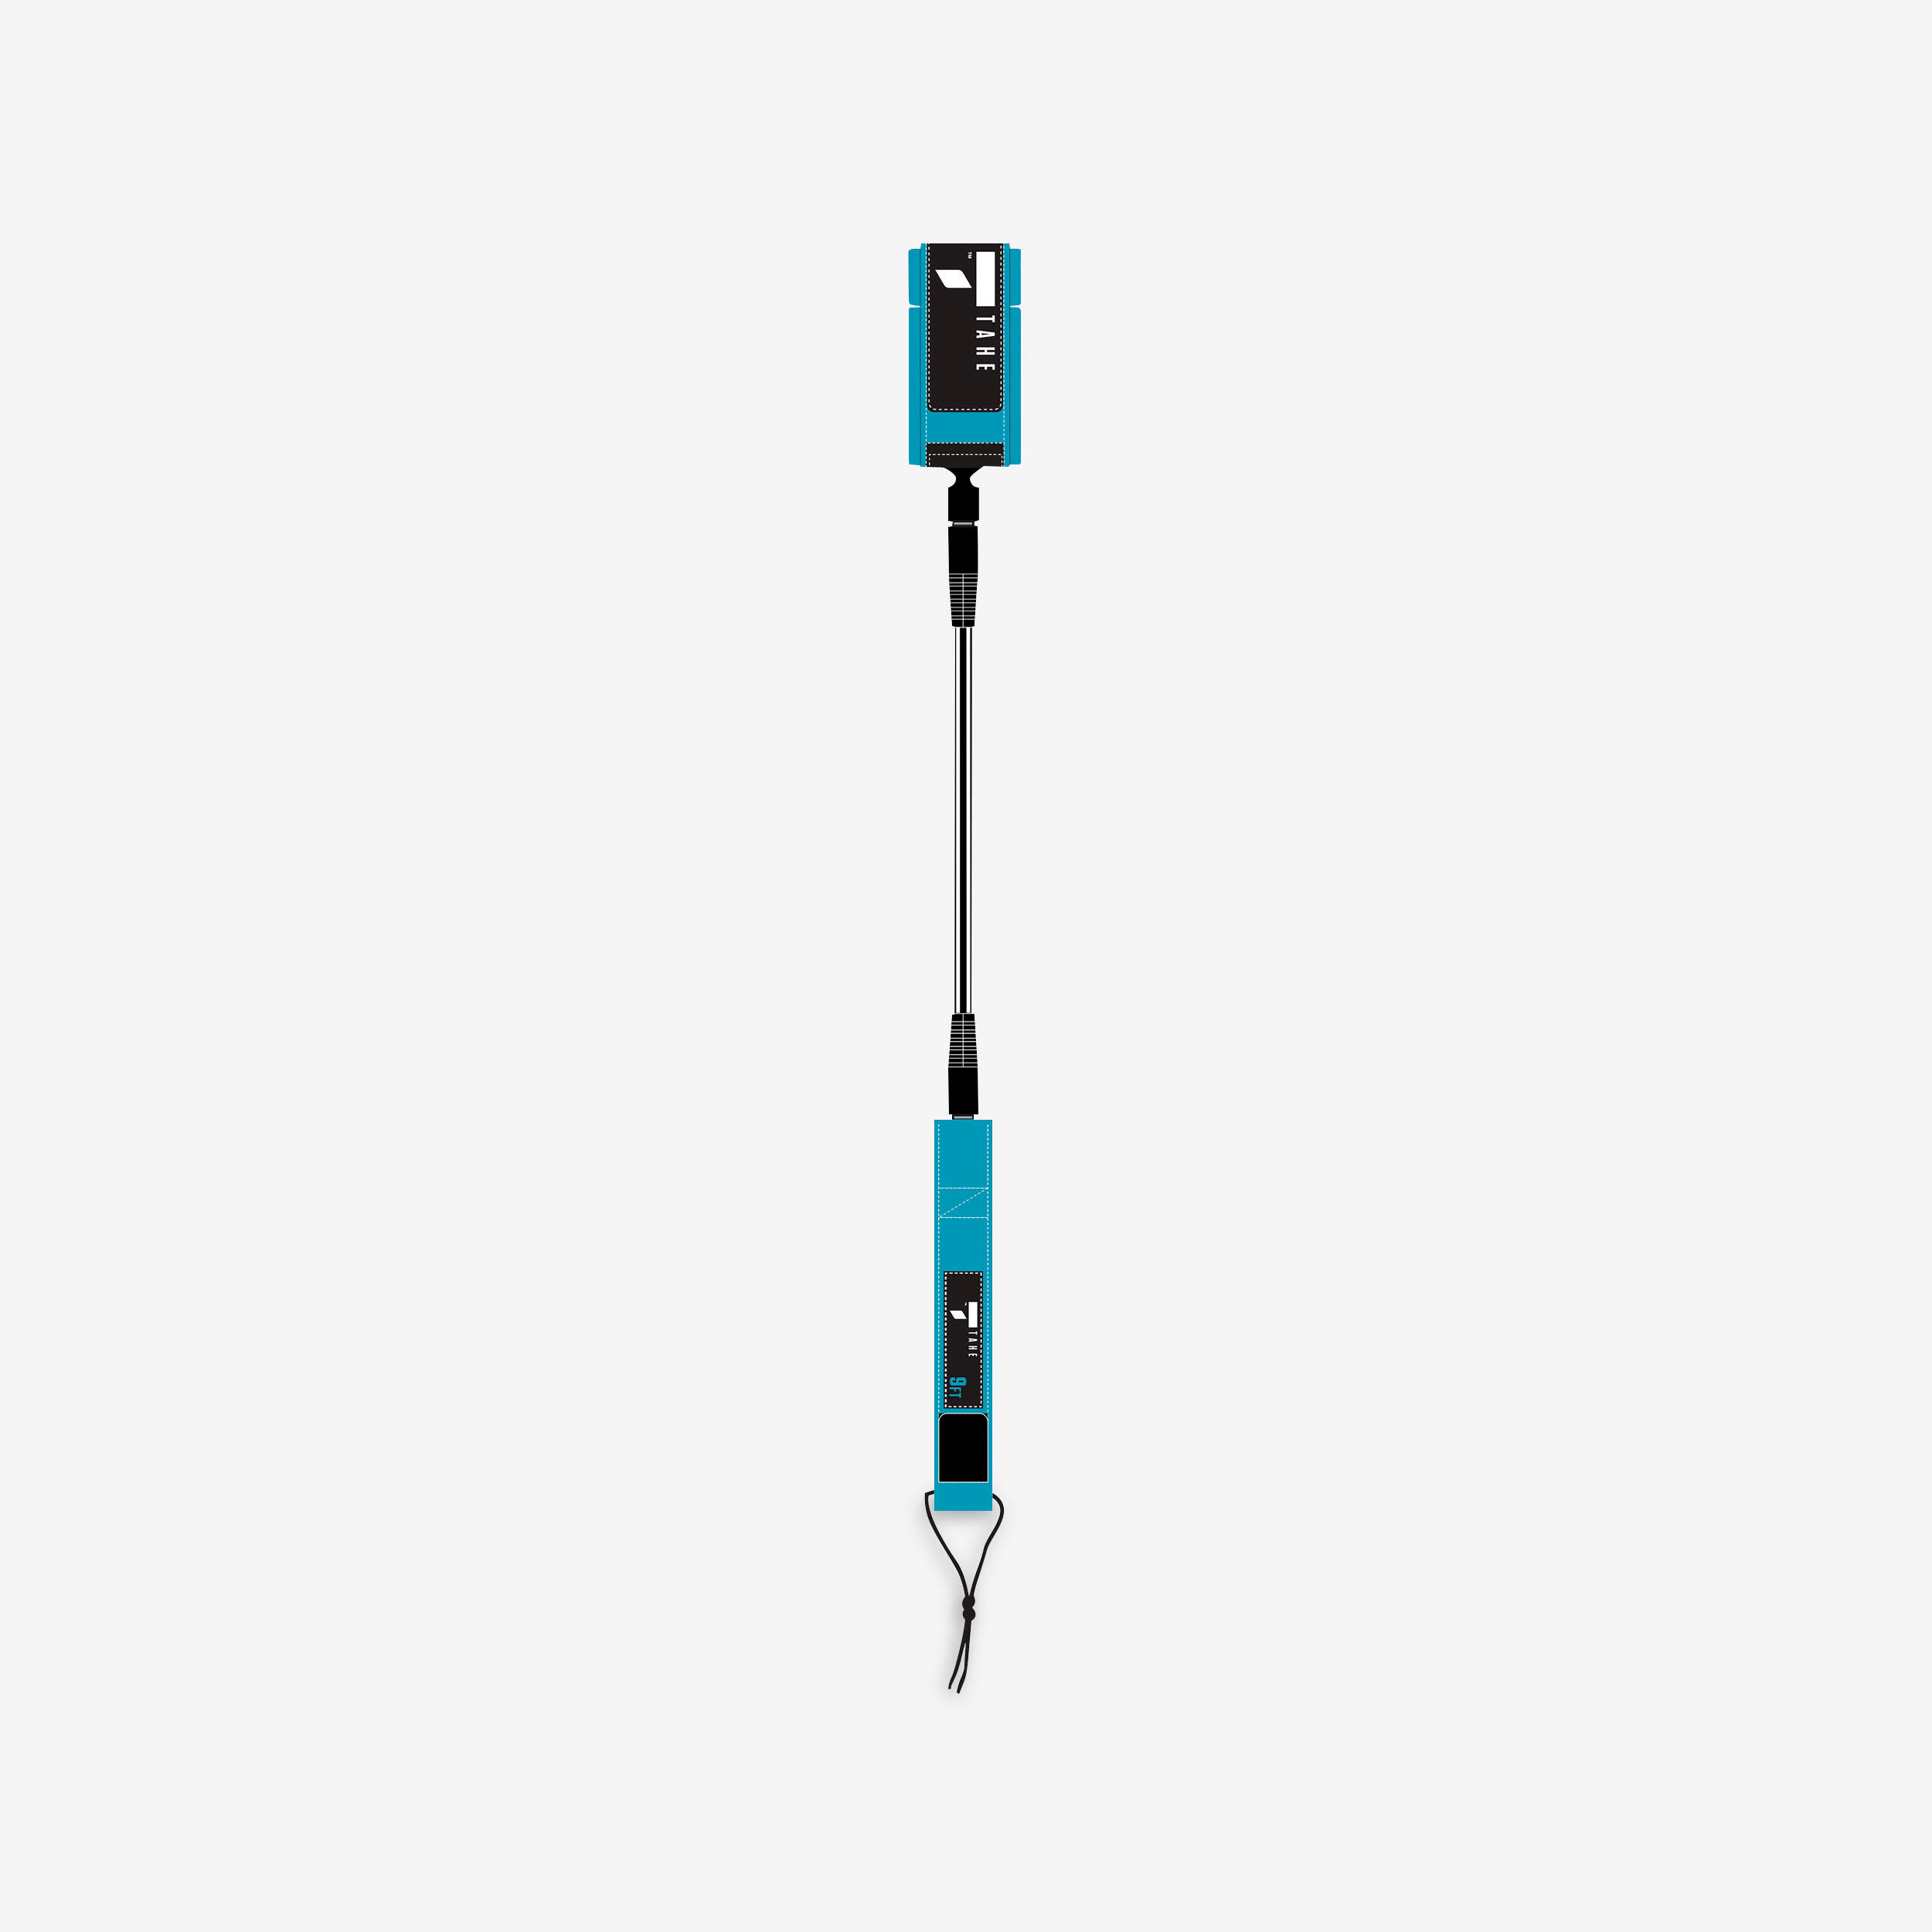 Leash STAND UP PADDLE STANDARD 2,75 M (SUP) Pagaie imagine noua